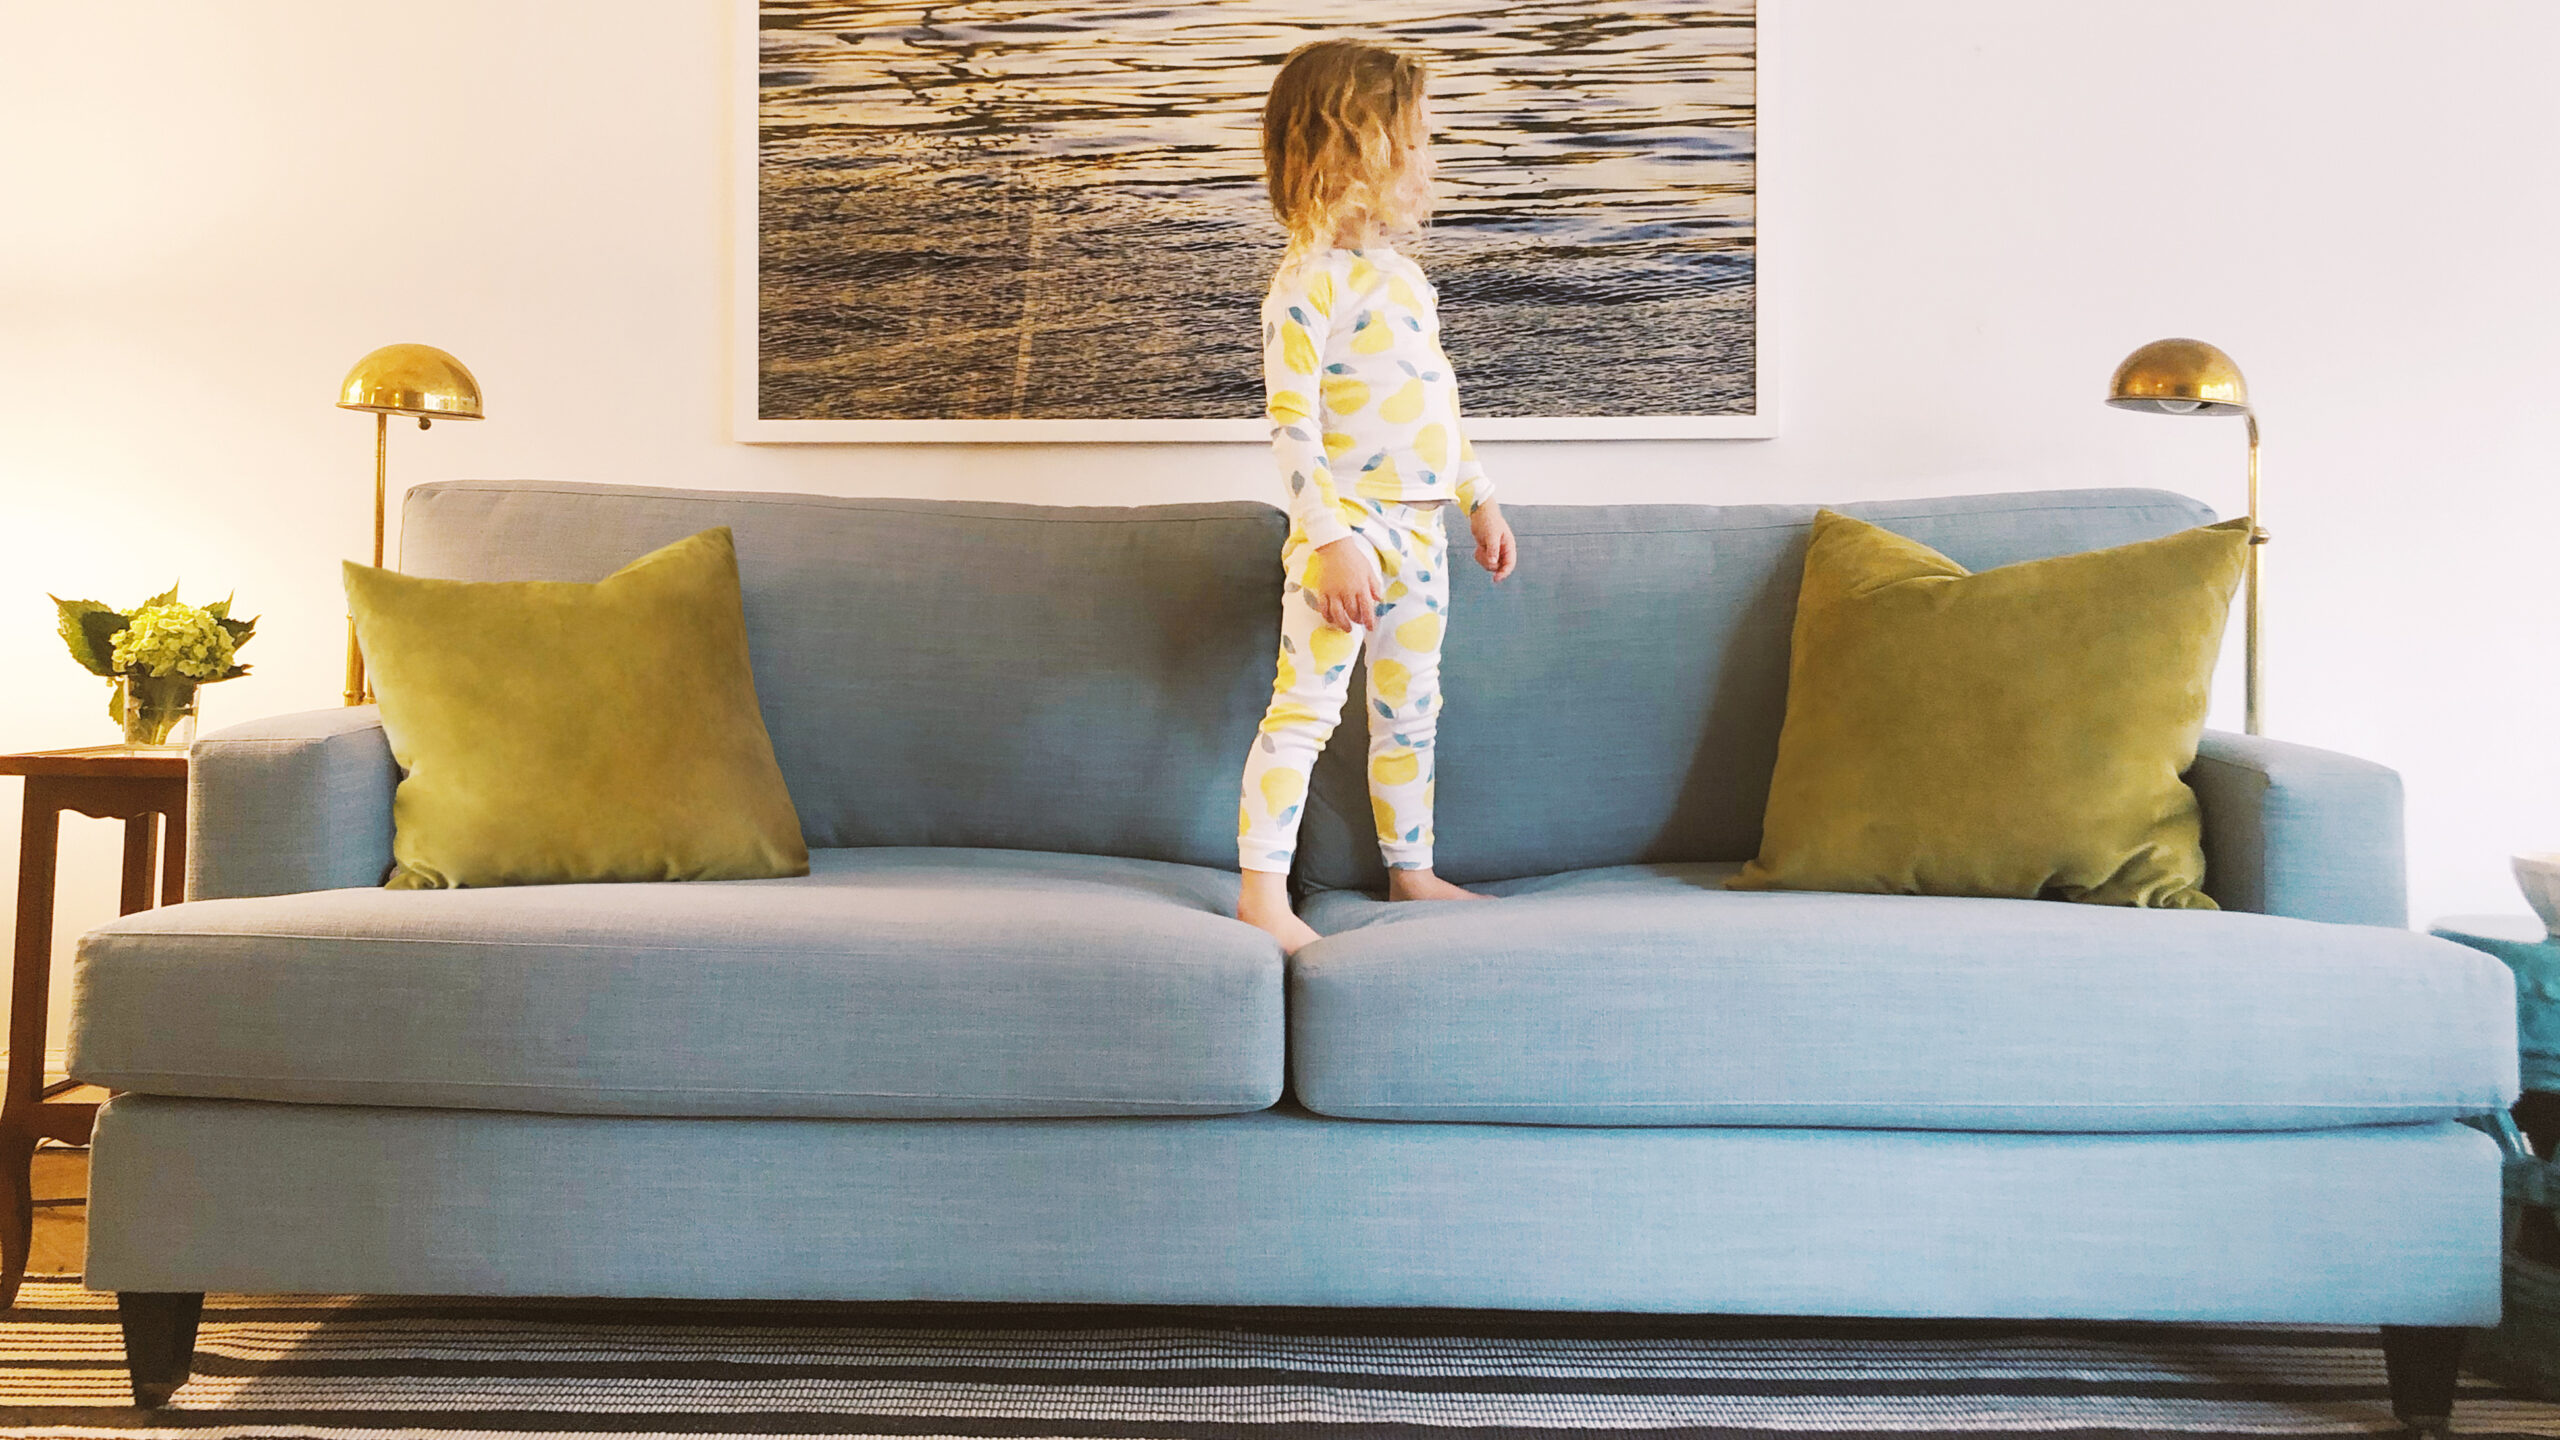 Classic sofa in a living room with a child on the sofa